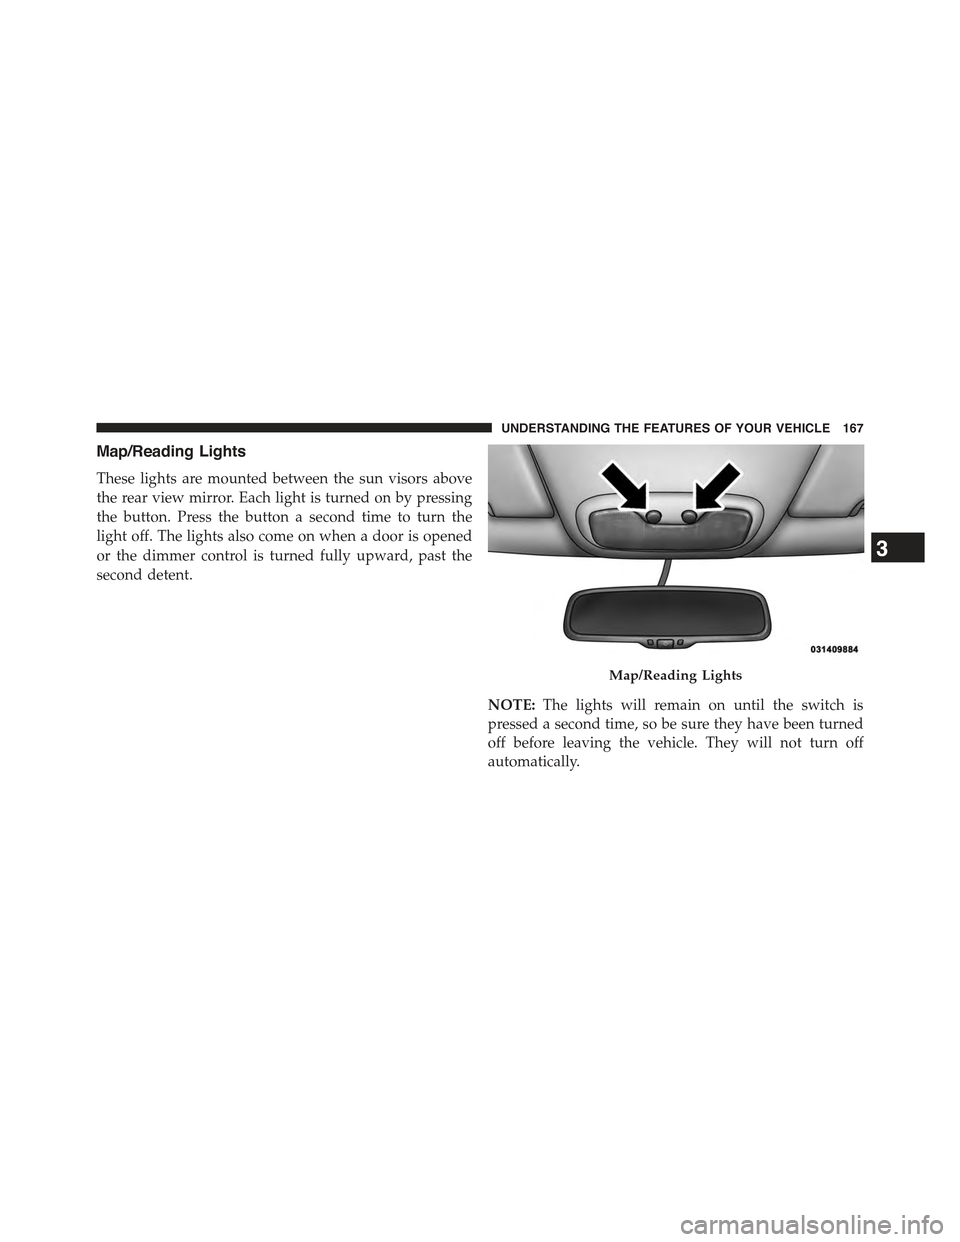 JEEP COMPASS 2015 1.G Owners Manual Map/Reading Lights
These lights are mounted between the sun visors above
the rear view mirror. Each light is turned on by pressing
the button. Press the button a second time to turn the
light off. The